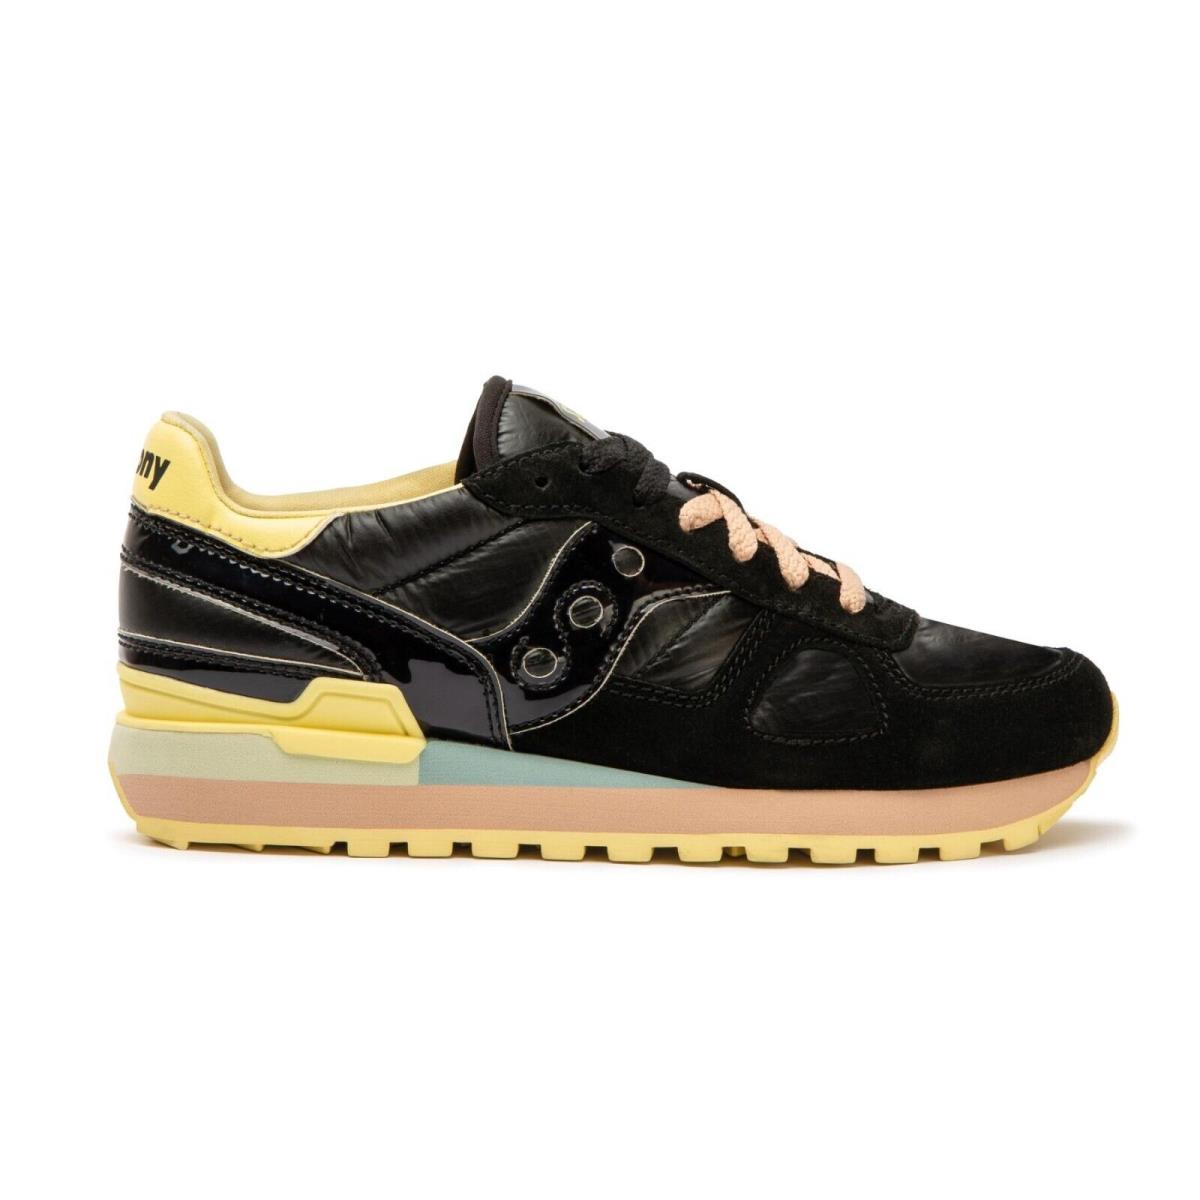 Saucony Women Casual Suede Color Black/yellow Size 7.5